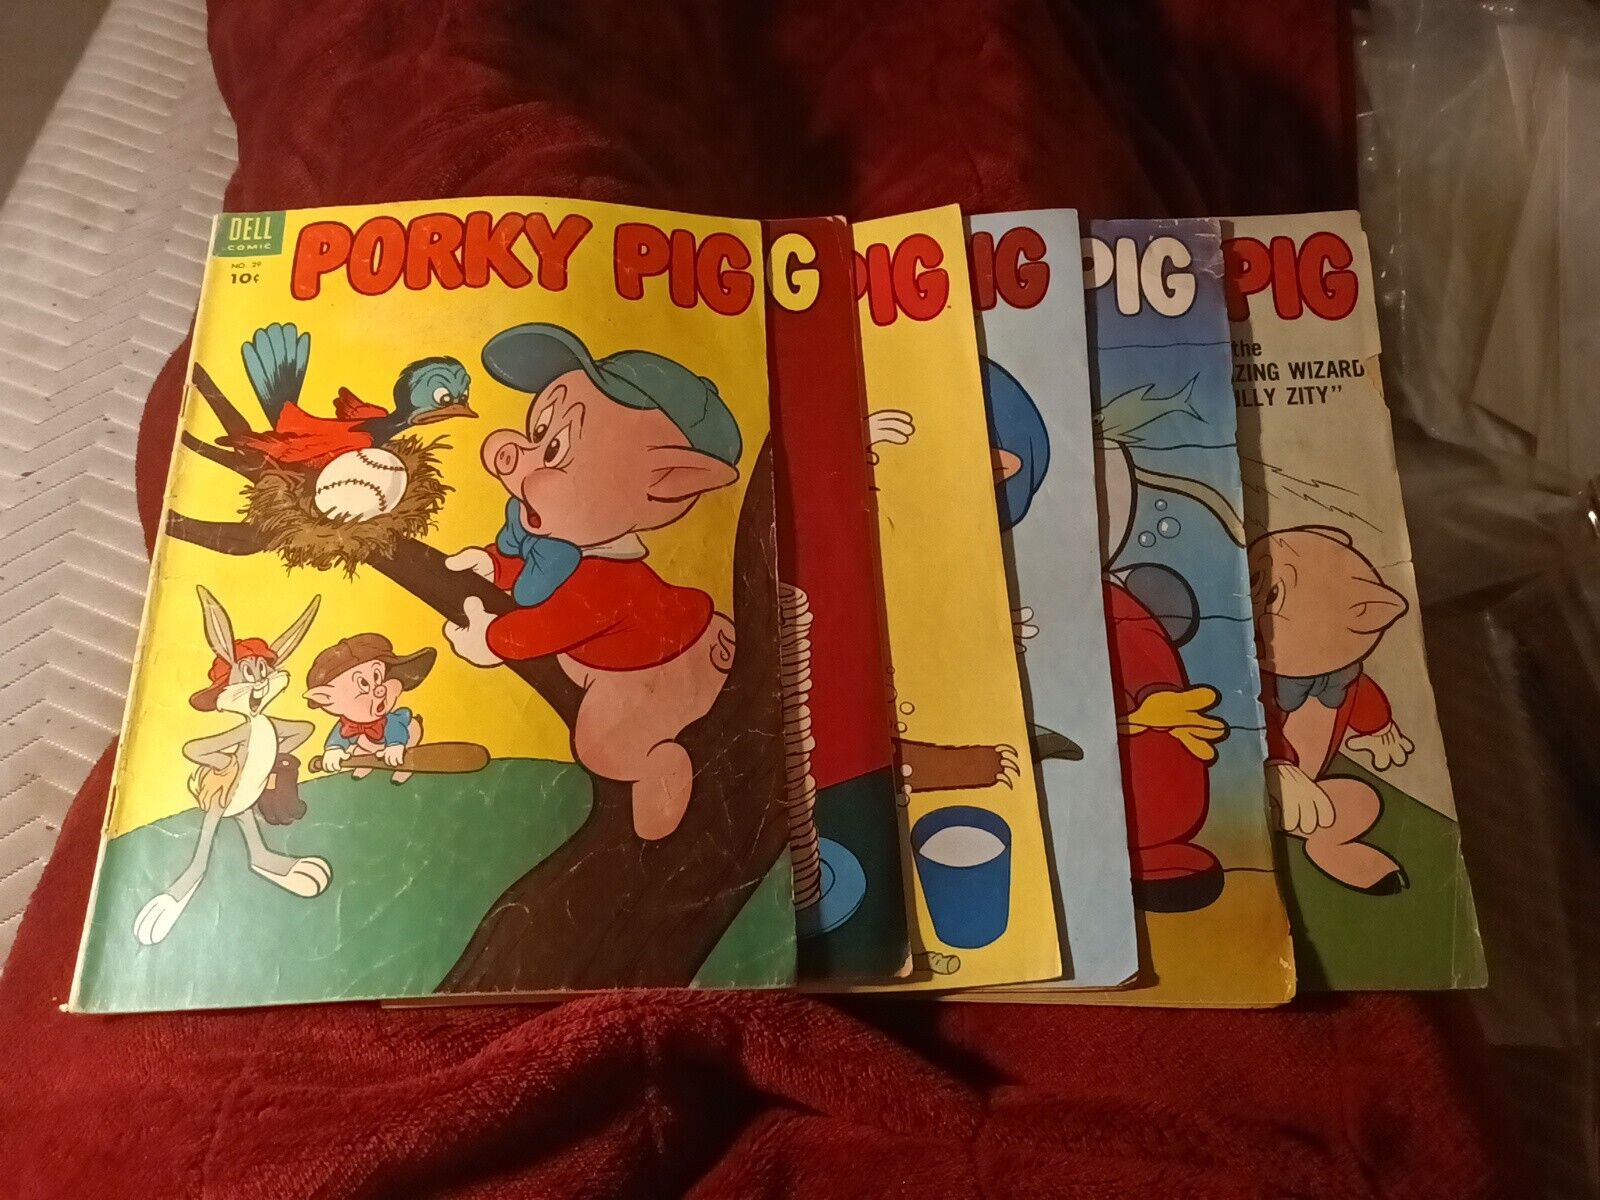 Porky Pig 6 Issue Dell Golden Silver Age Comics Lot Run Set Collection Cartoon